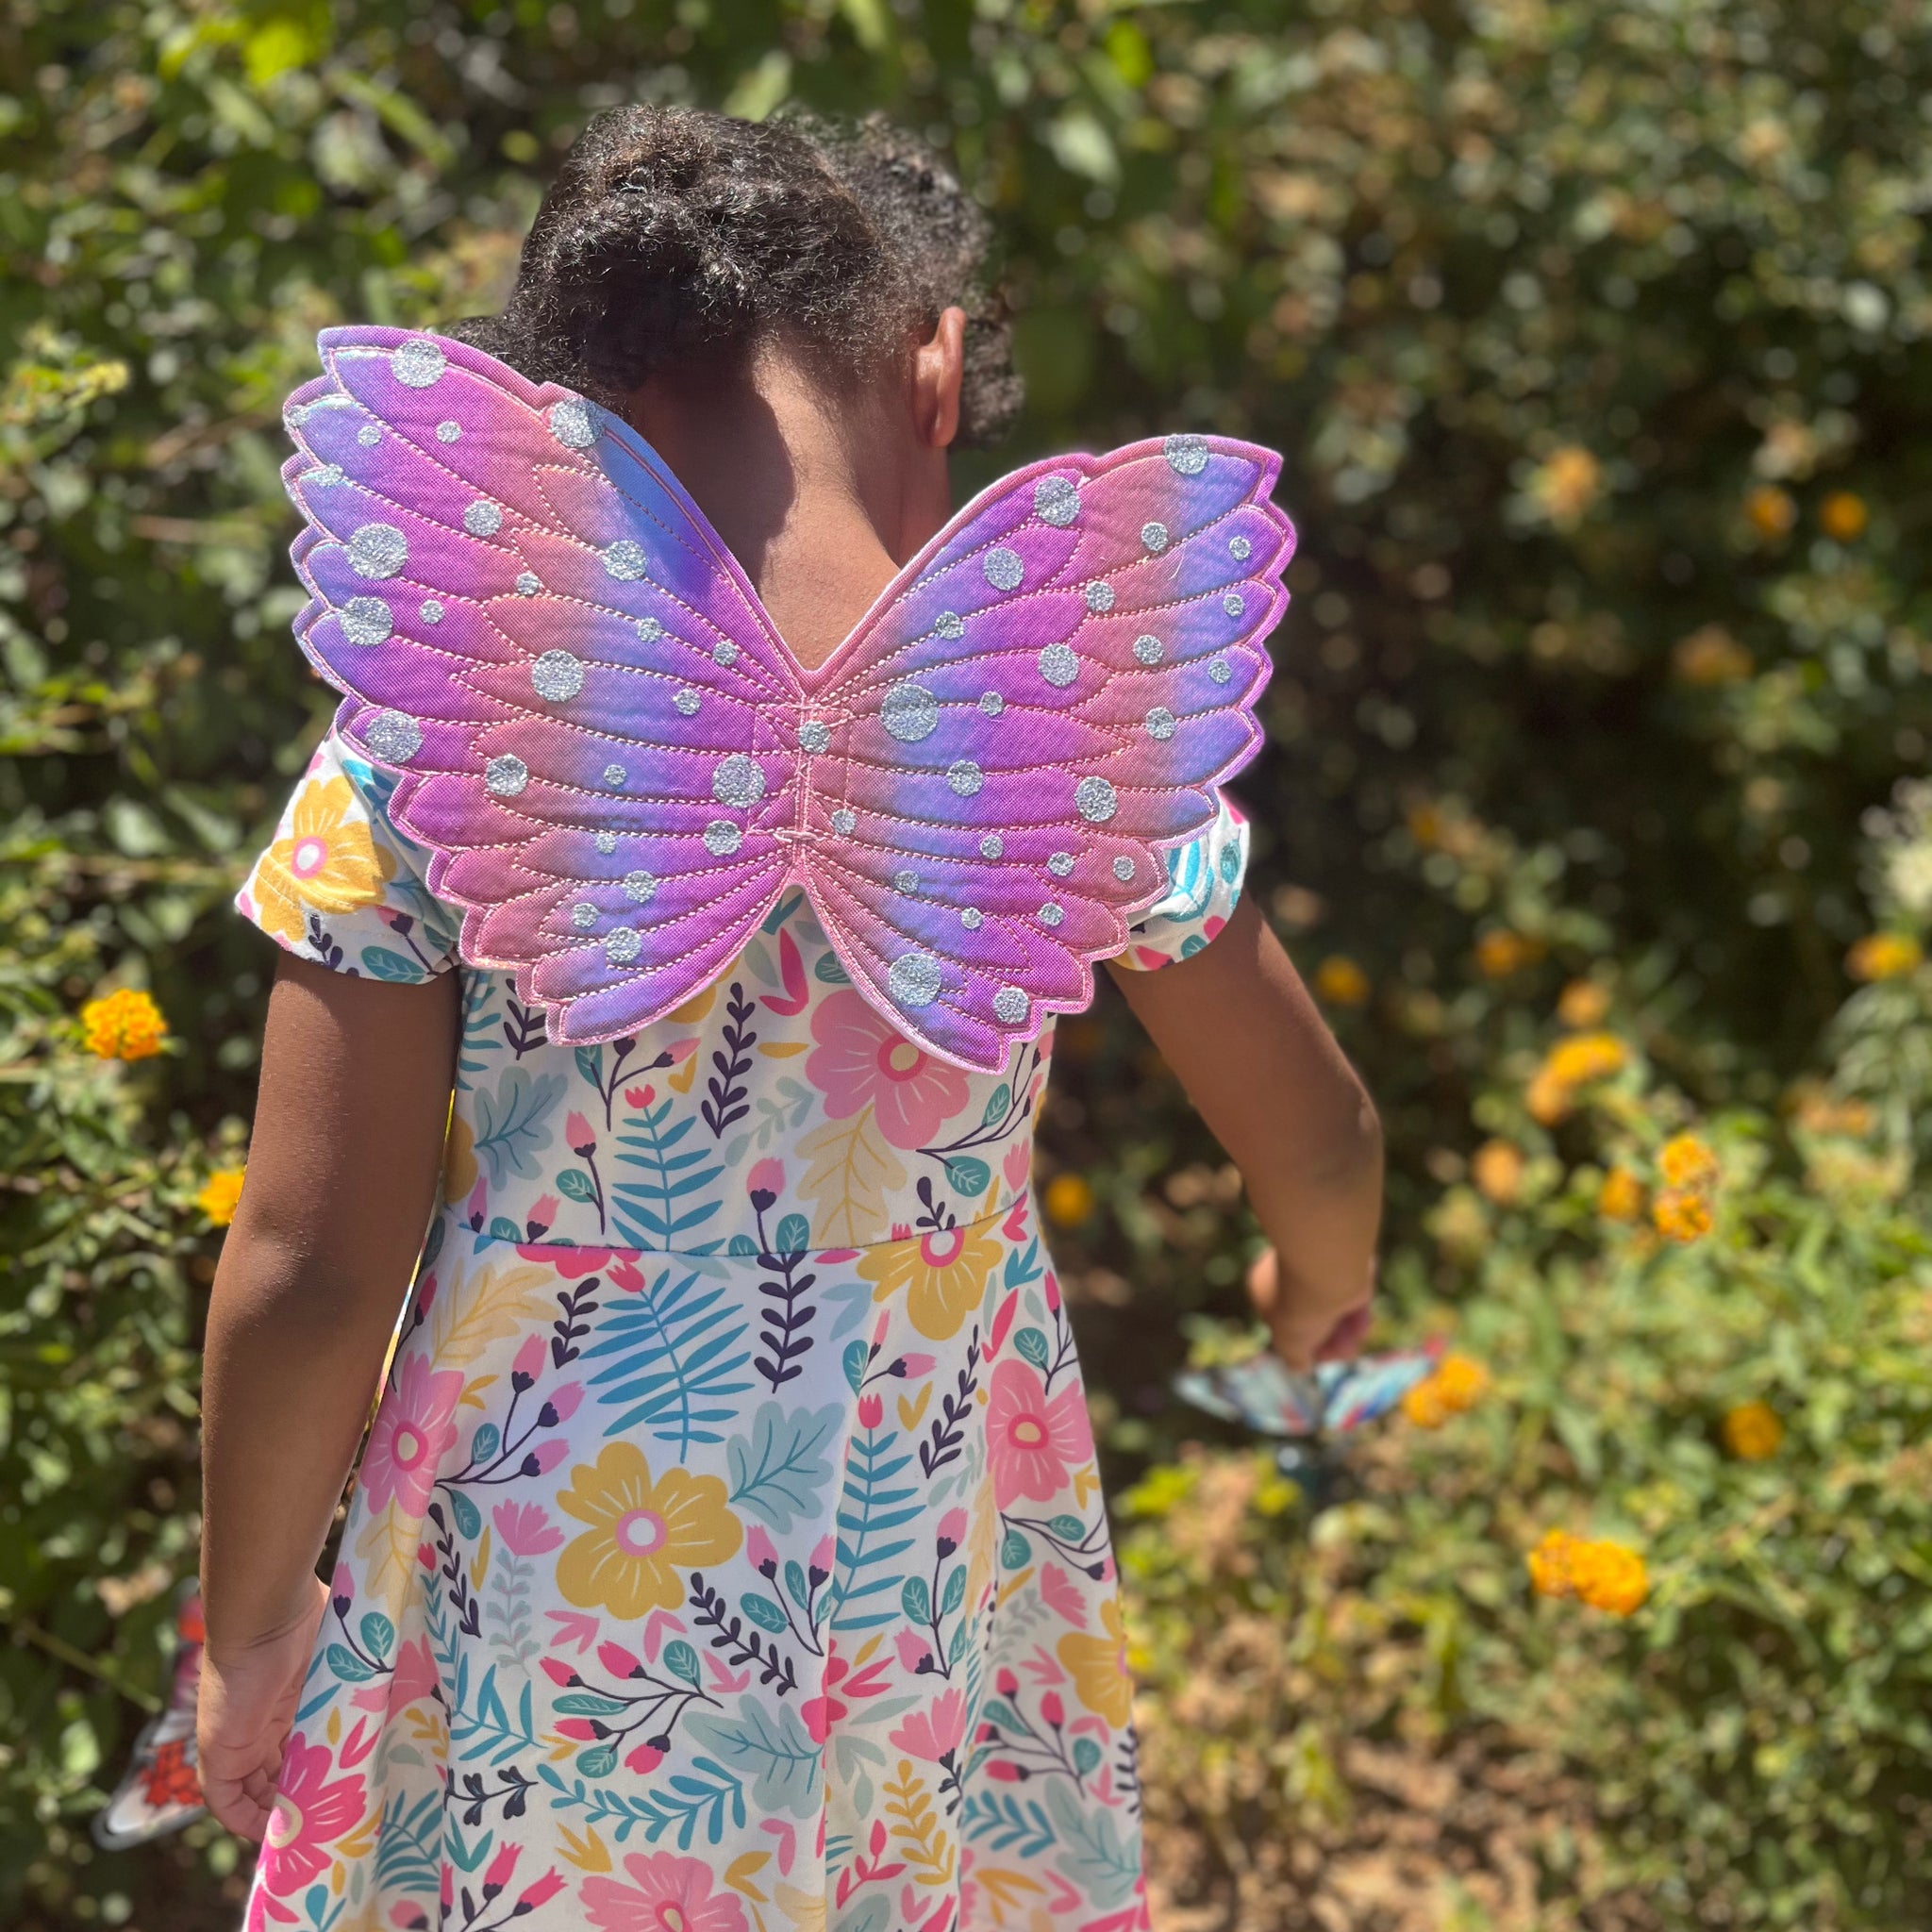 Sassy Butterfly Wings